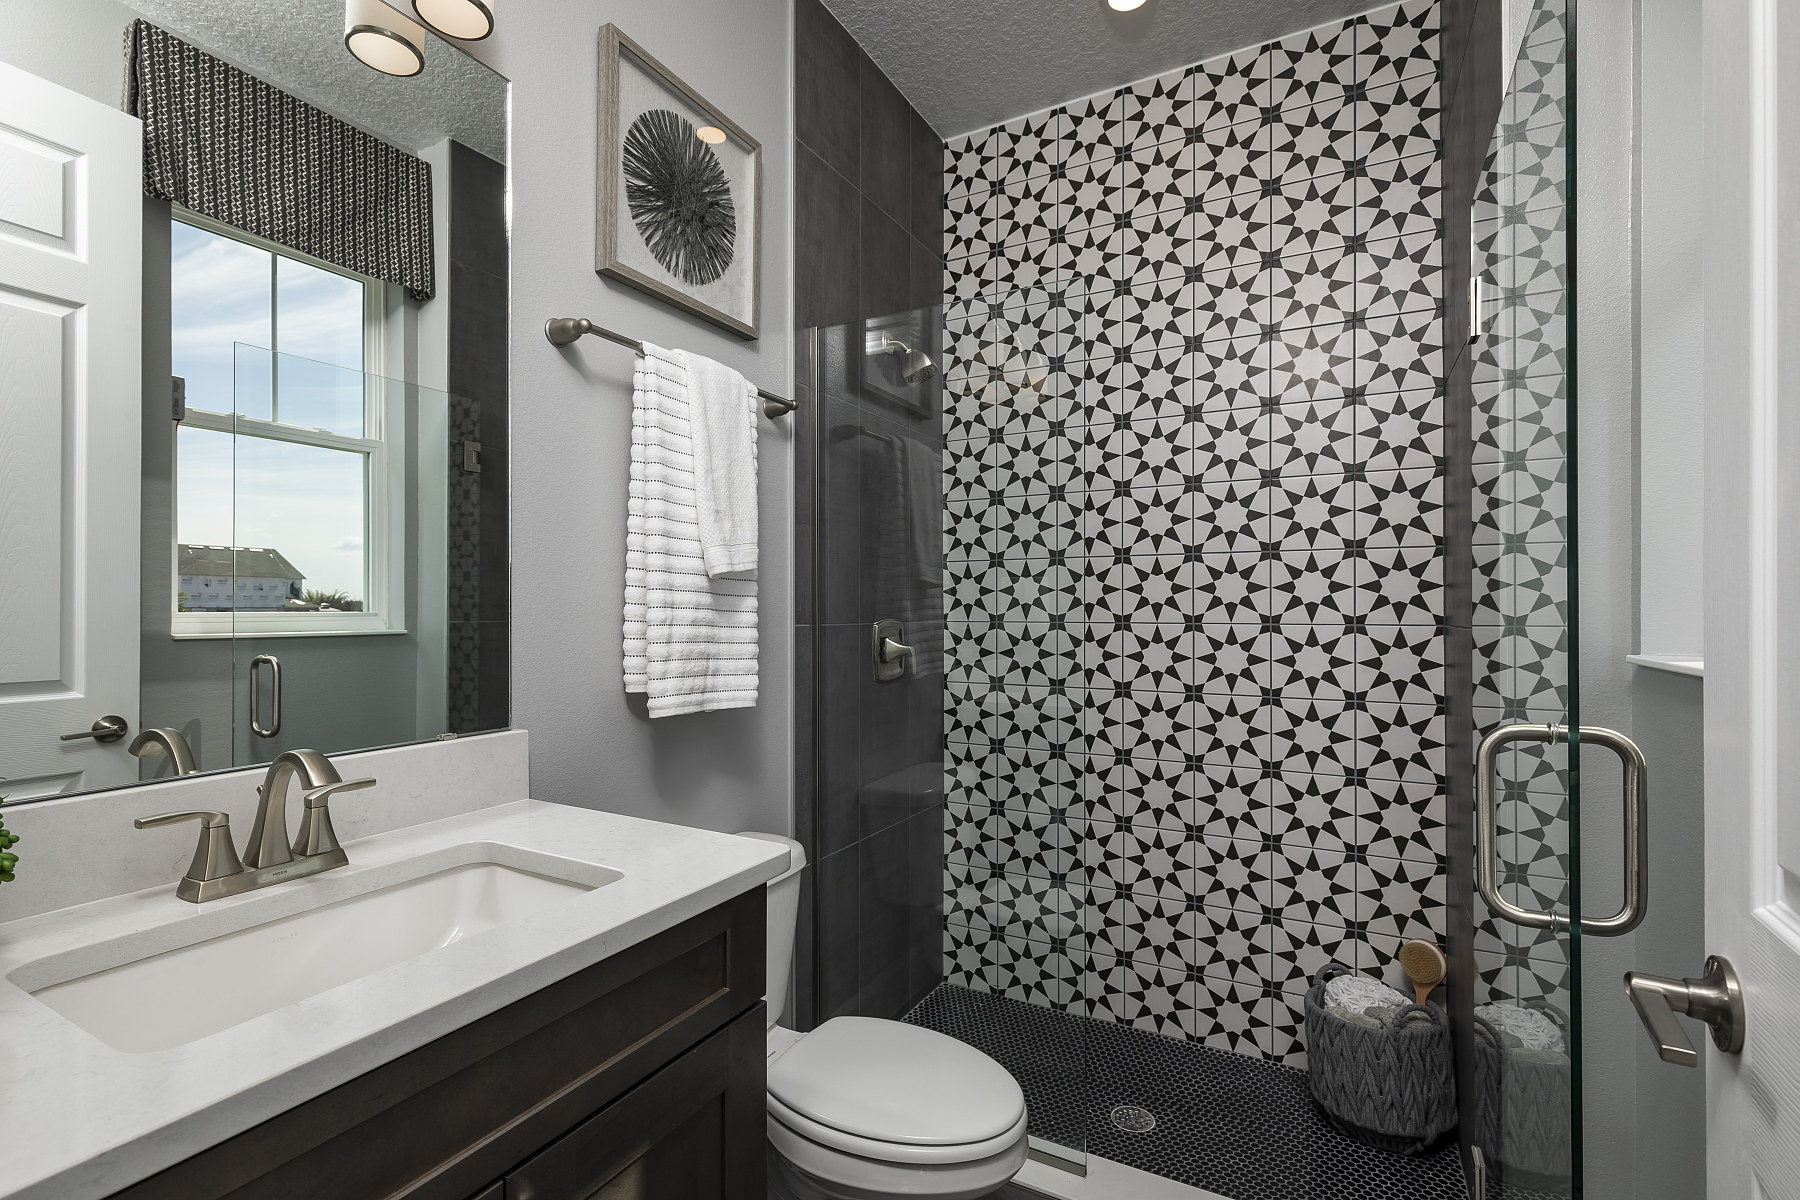 Bathroom With Black and White Patterned Tile and Light Gray Walls